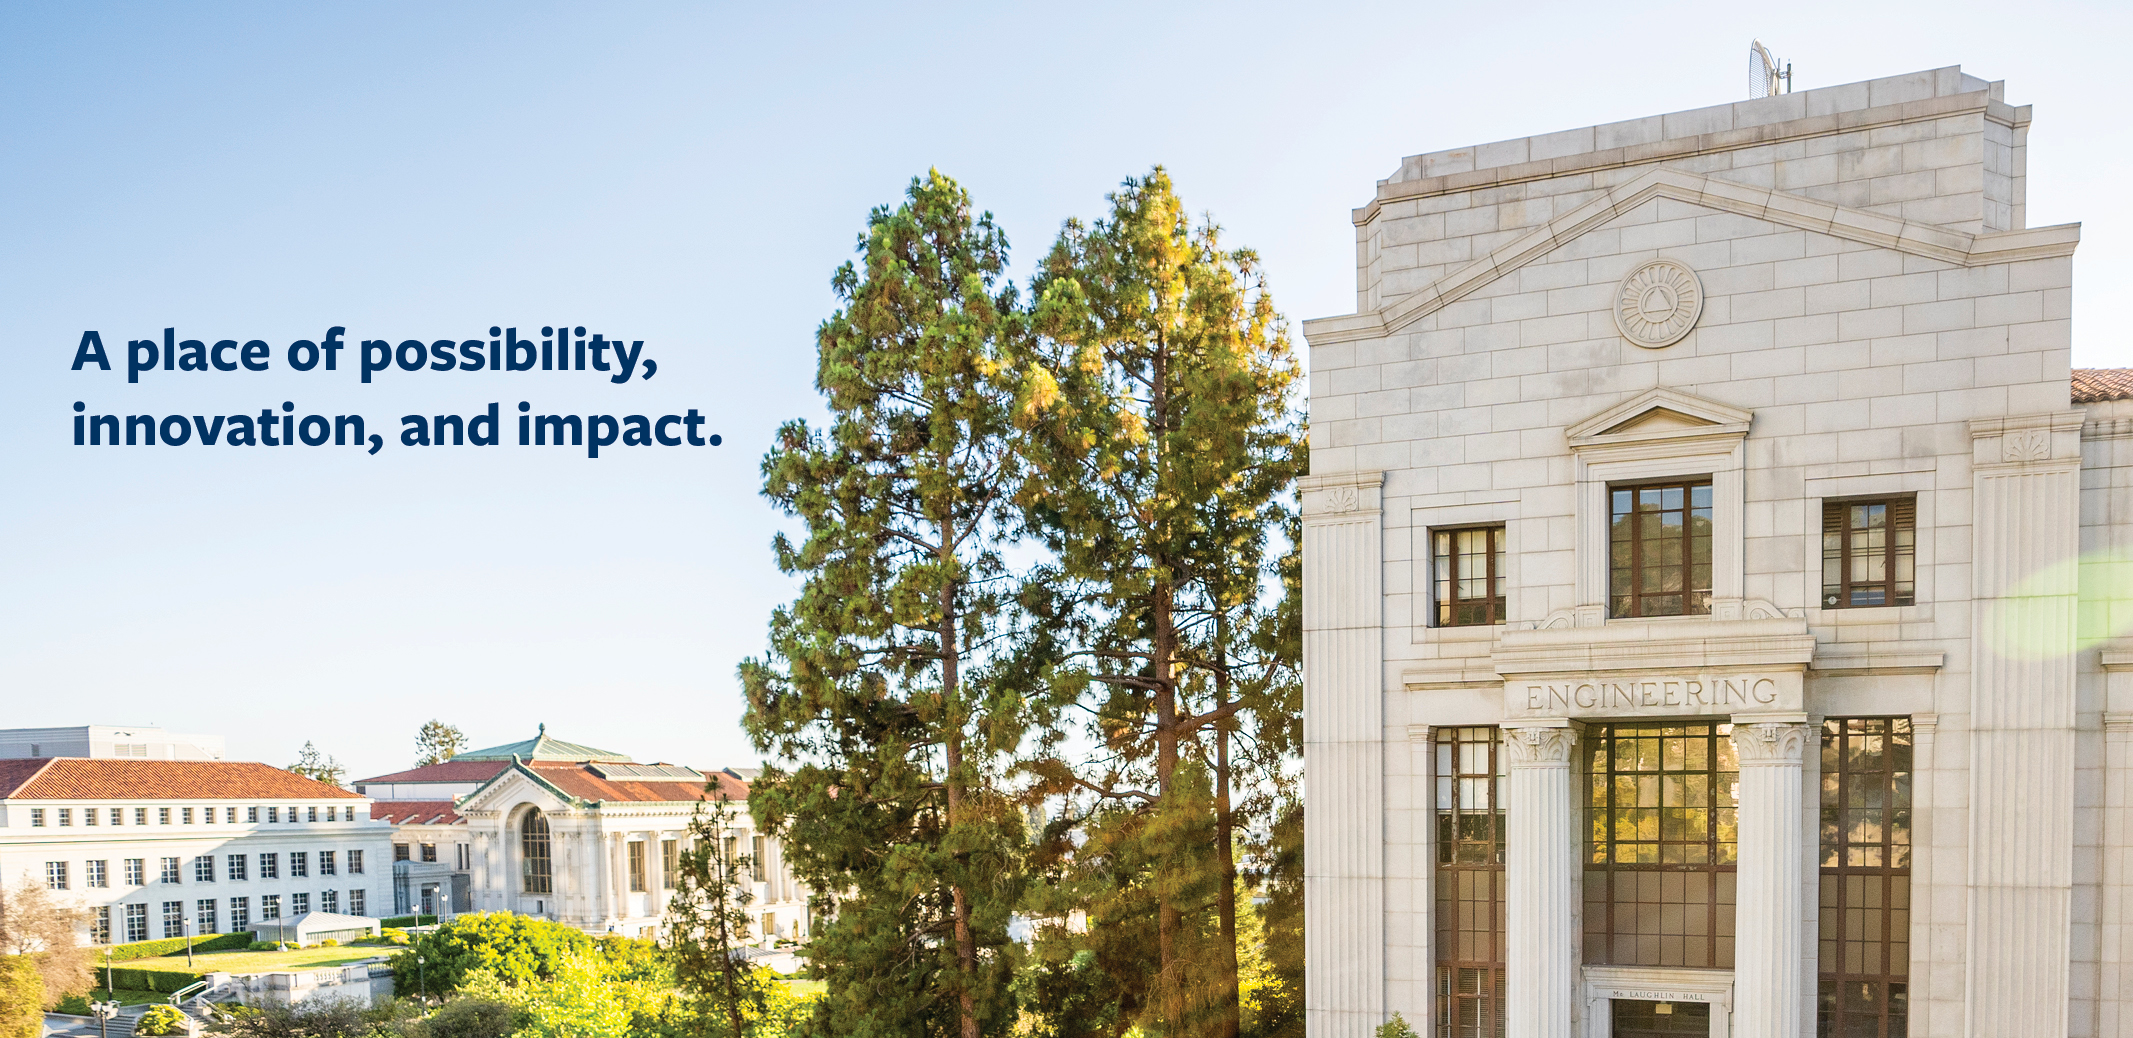 Berkeley IEOR: A place of possibility, innovation, and impact.